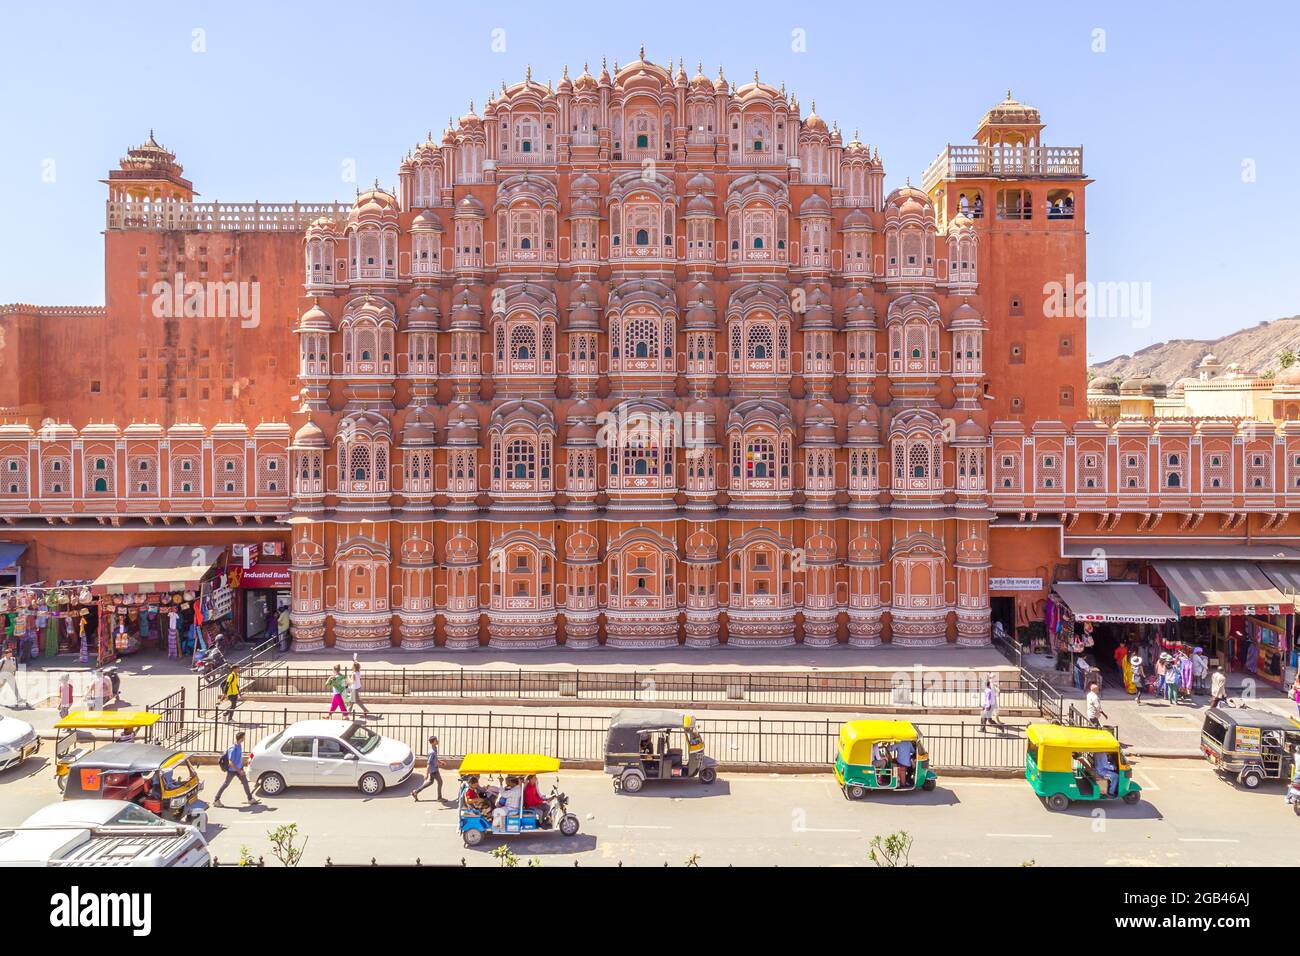 JAIPUR, INDIA - 22ND MARCH 2016: The front of the Hawa Mahal (Palace of the Winds) in central Jaipur. People can be seen. Stock Photo